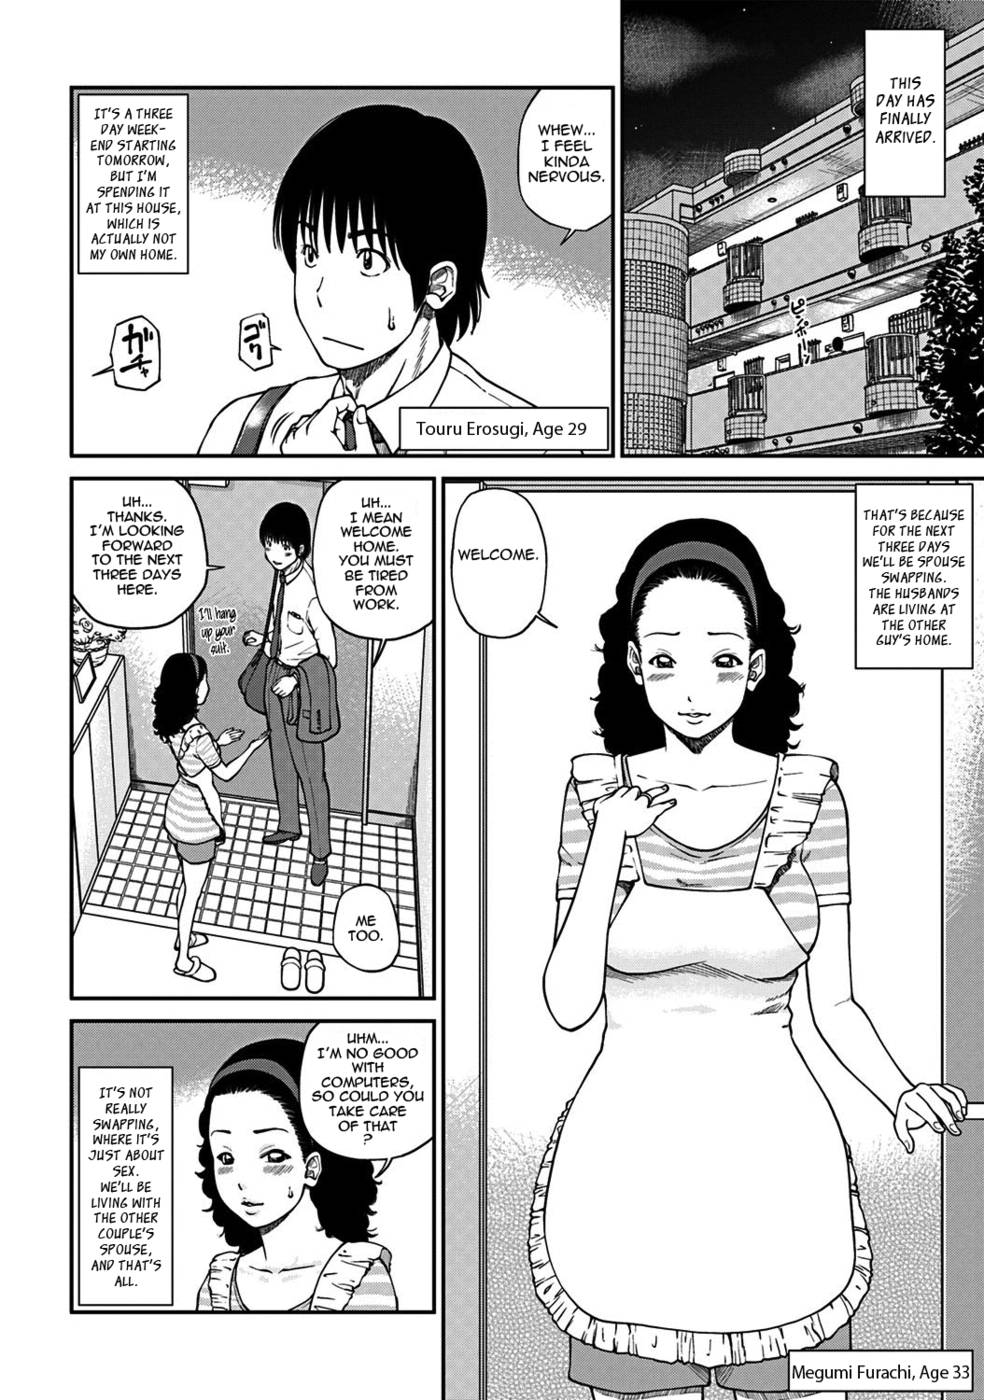 33 Year Old Unsatisfied Wife-Chapter 2-Spouse Swapping-First Night-Hentai Manga Hentai Comic image picture